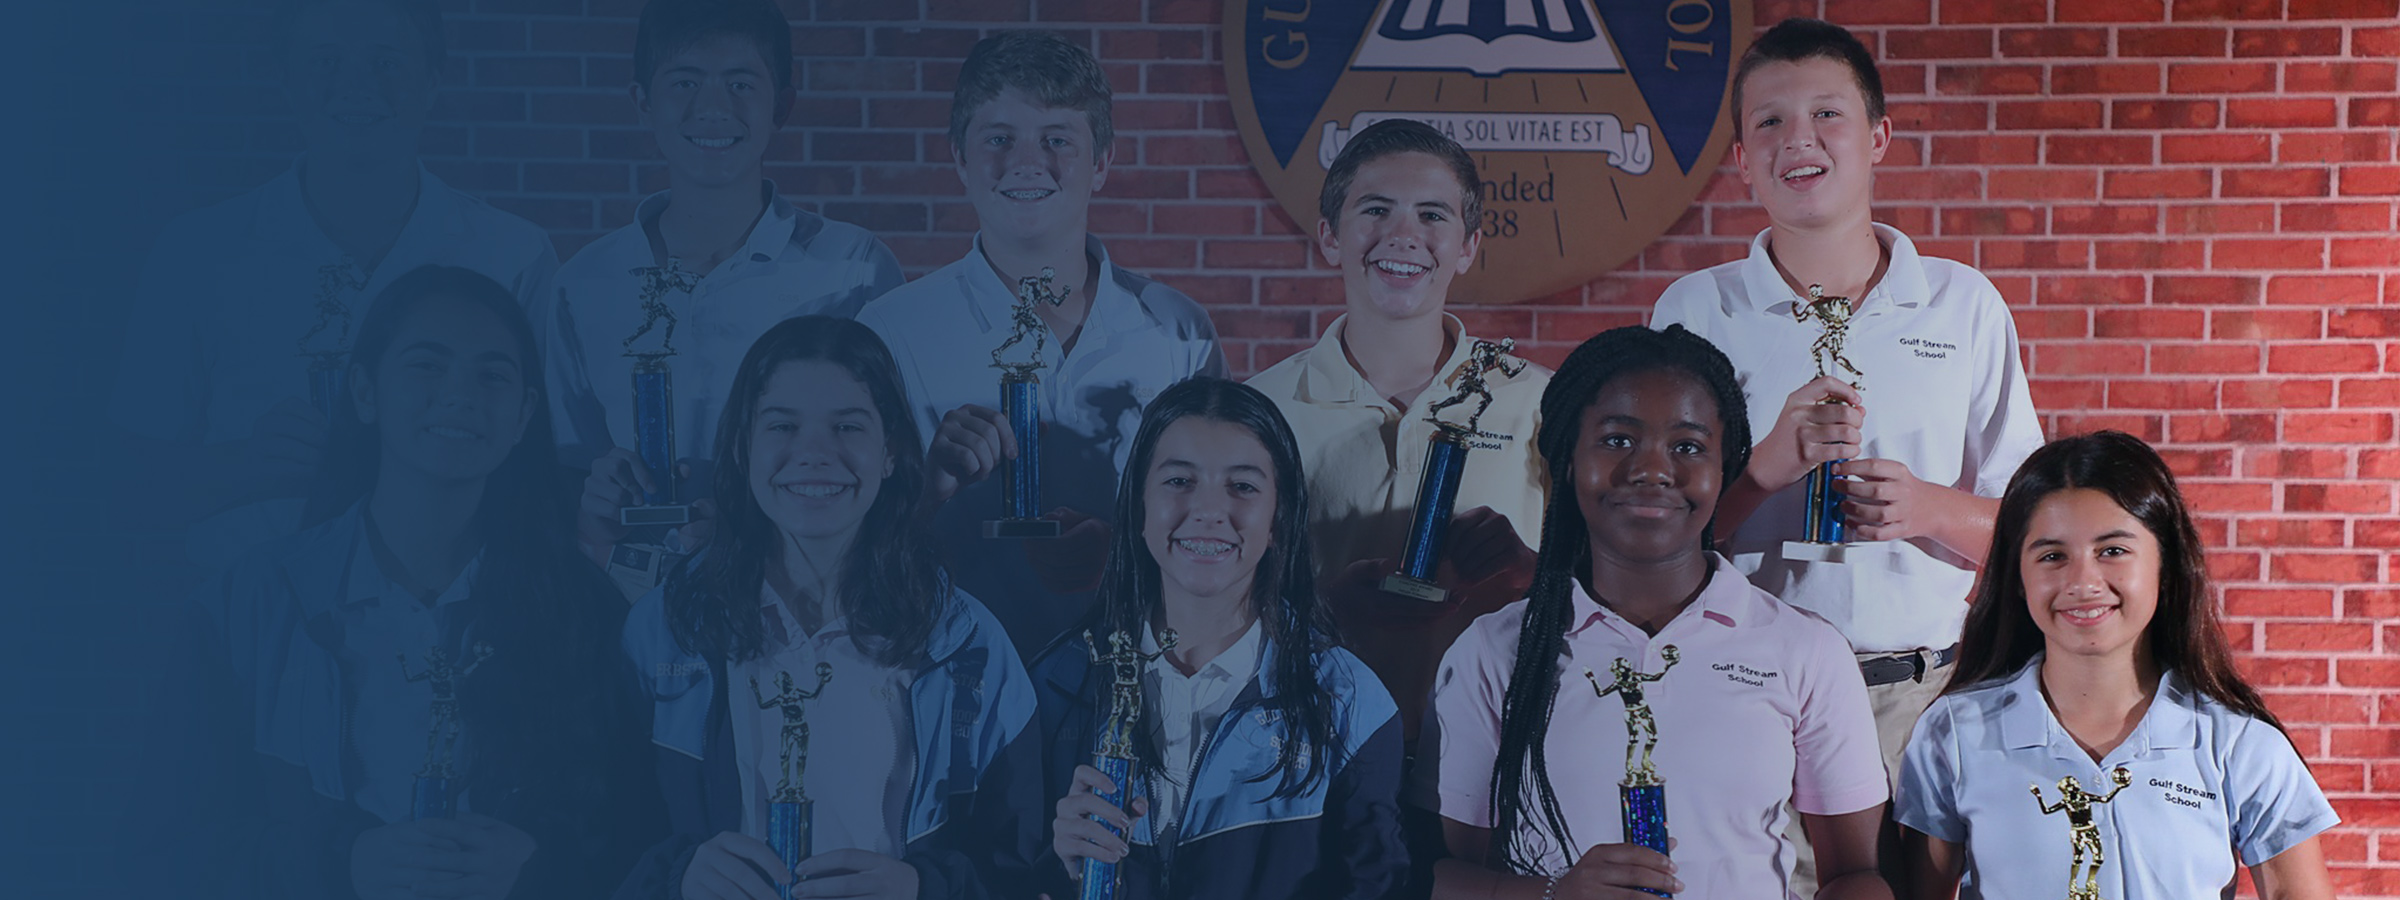 private school students with trophies